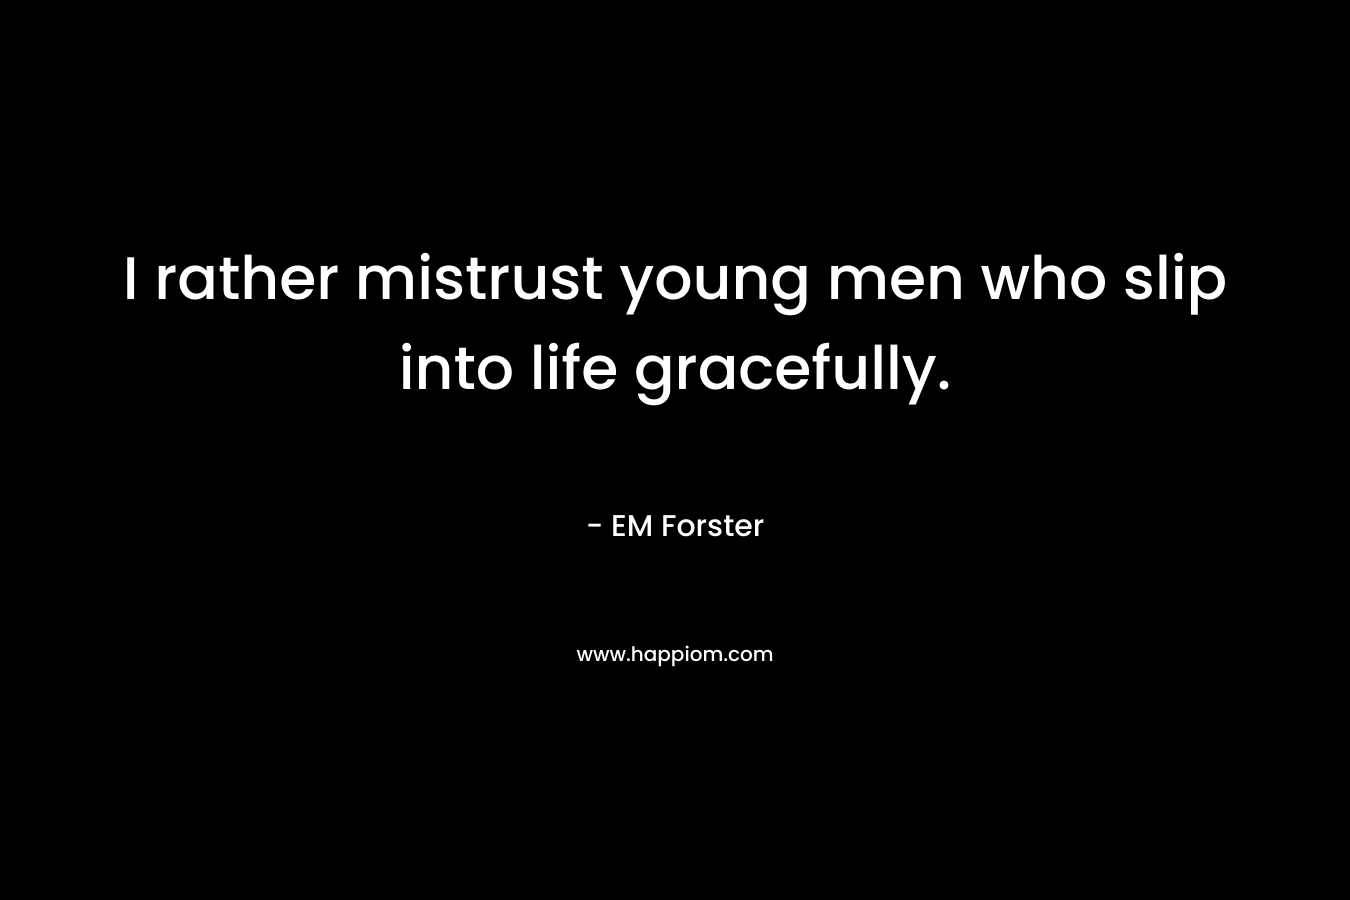 I rather mistrust young men who slip into life gracefully.